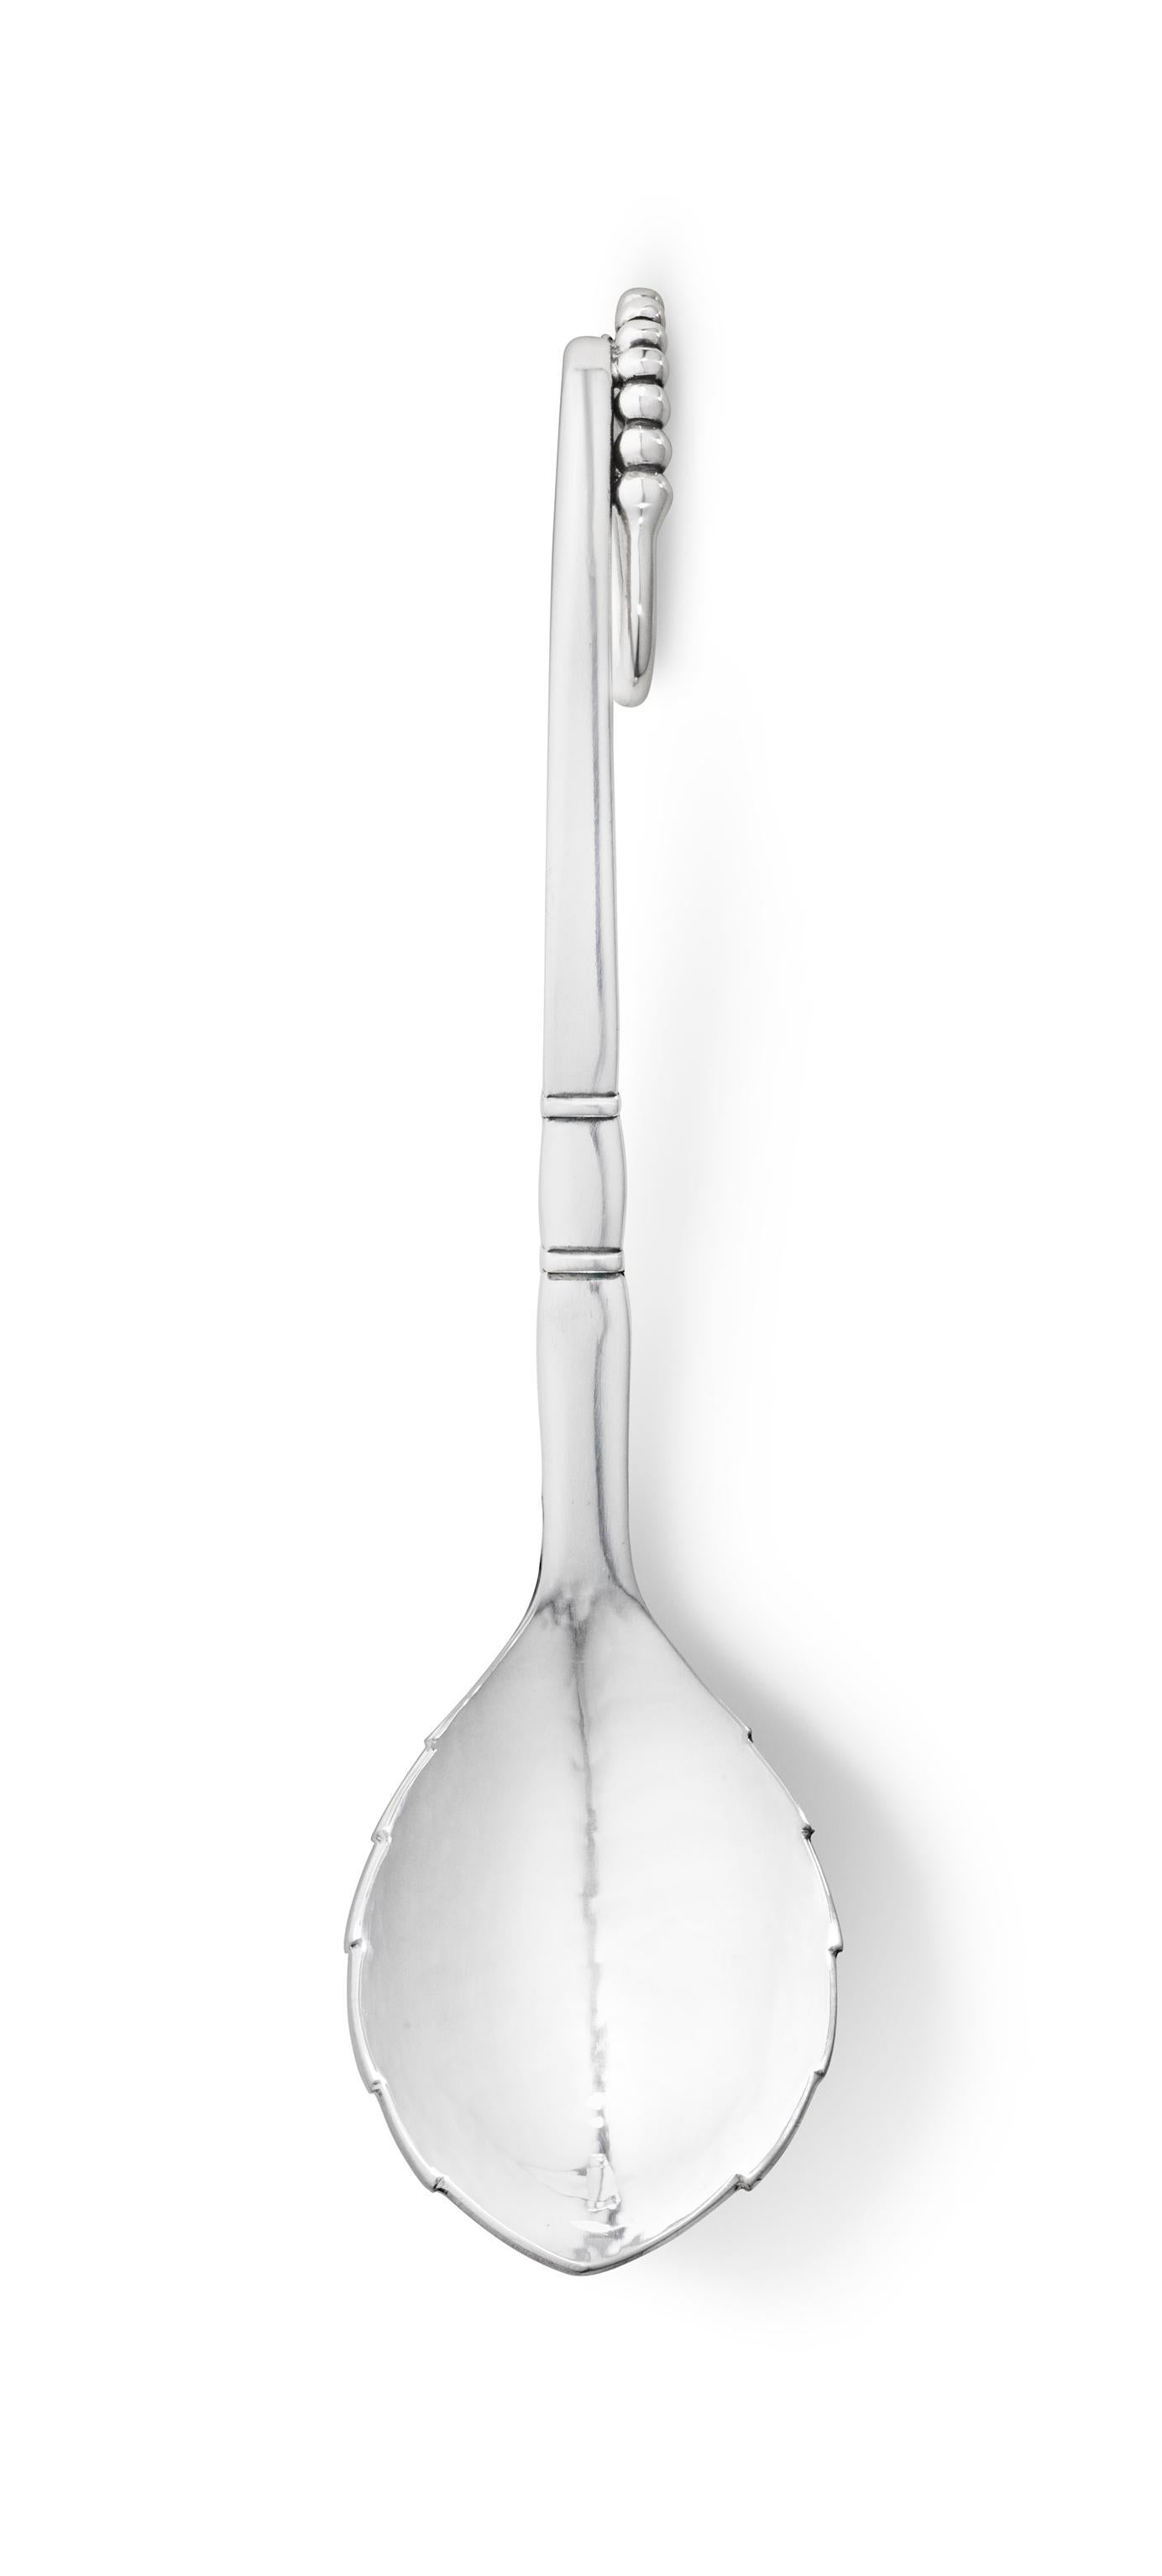 Ornamental items from the Georg Jensen Silversmithy are individual flatware pieces, all of which were designed by Georg Jensen in the period 1912–1923. Even today every piece is made in the old artisan tradition of craftsmanship. Ornamental items